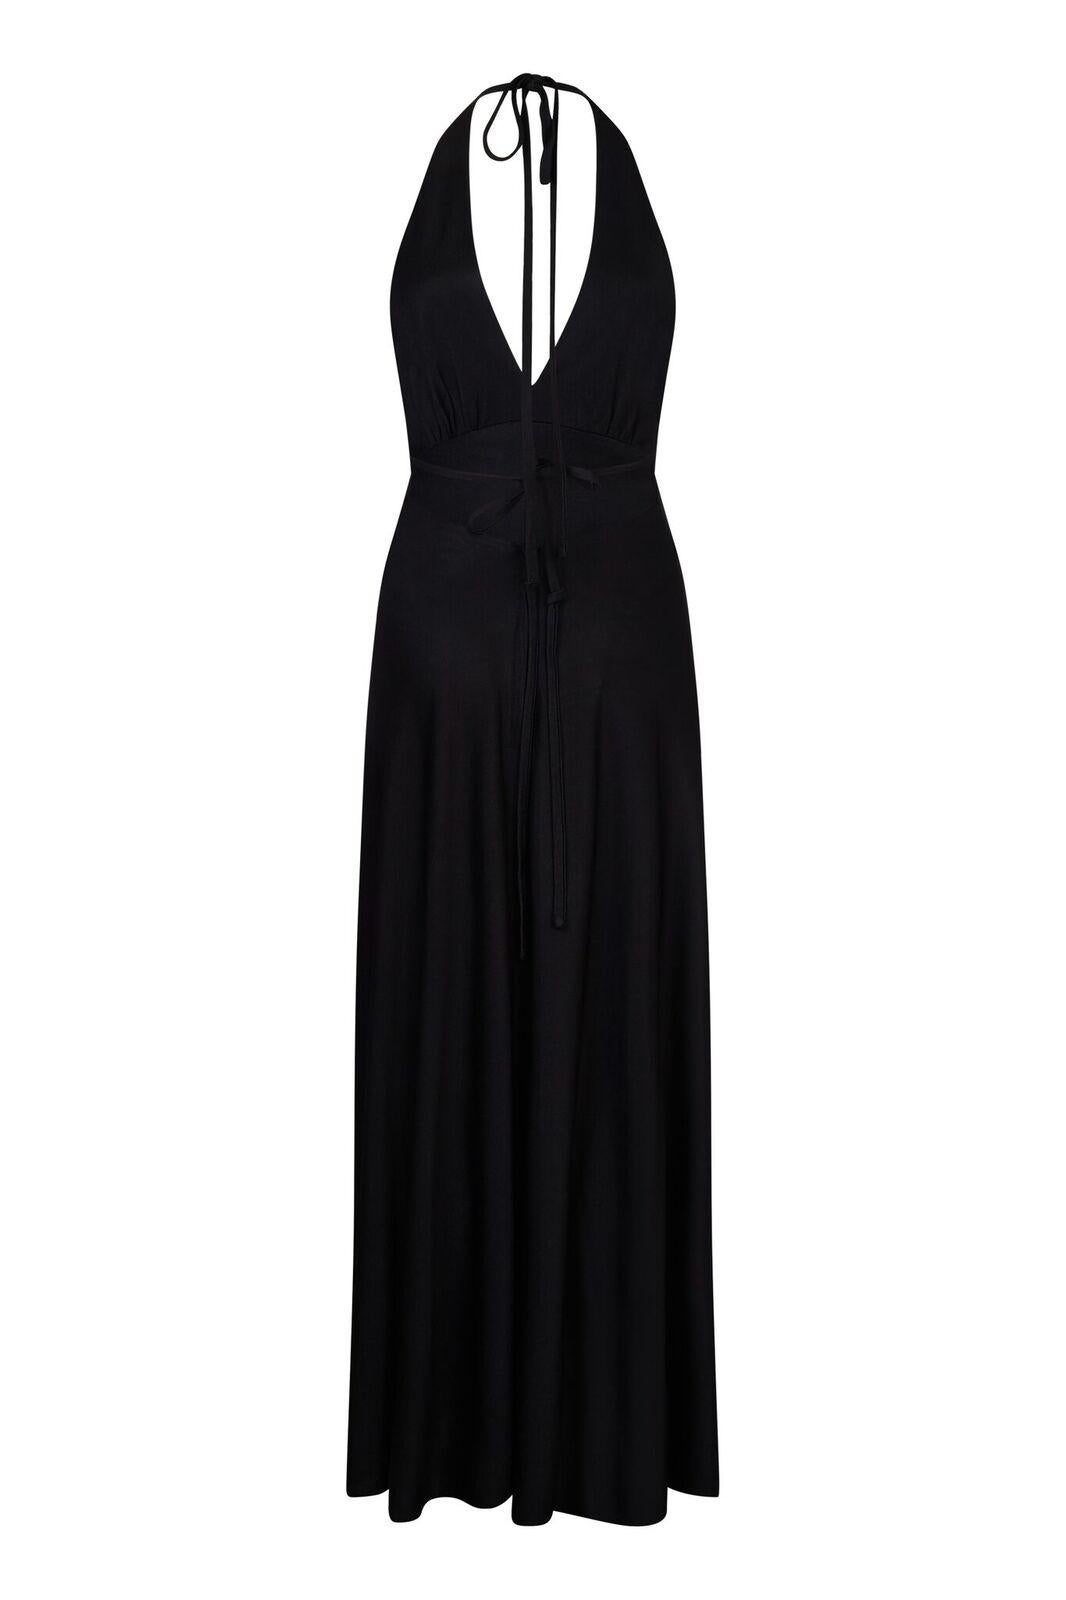 This fantastic 1970s black halter neck jersey dress by Jeff Banks exclusively for his label, Clobber, is a wonderful example of disco era glamour and has a seductive, elegant line. The beauty of this piece lies in its simplicity, and the lithe,